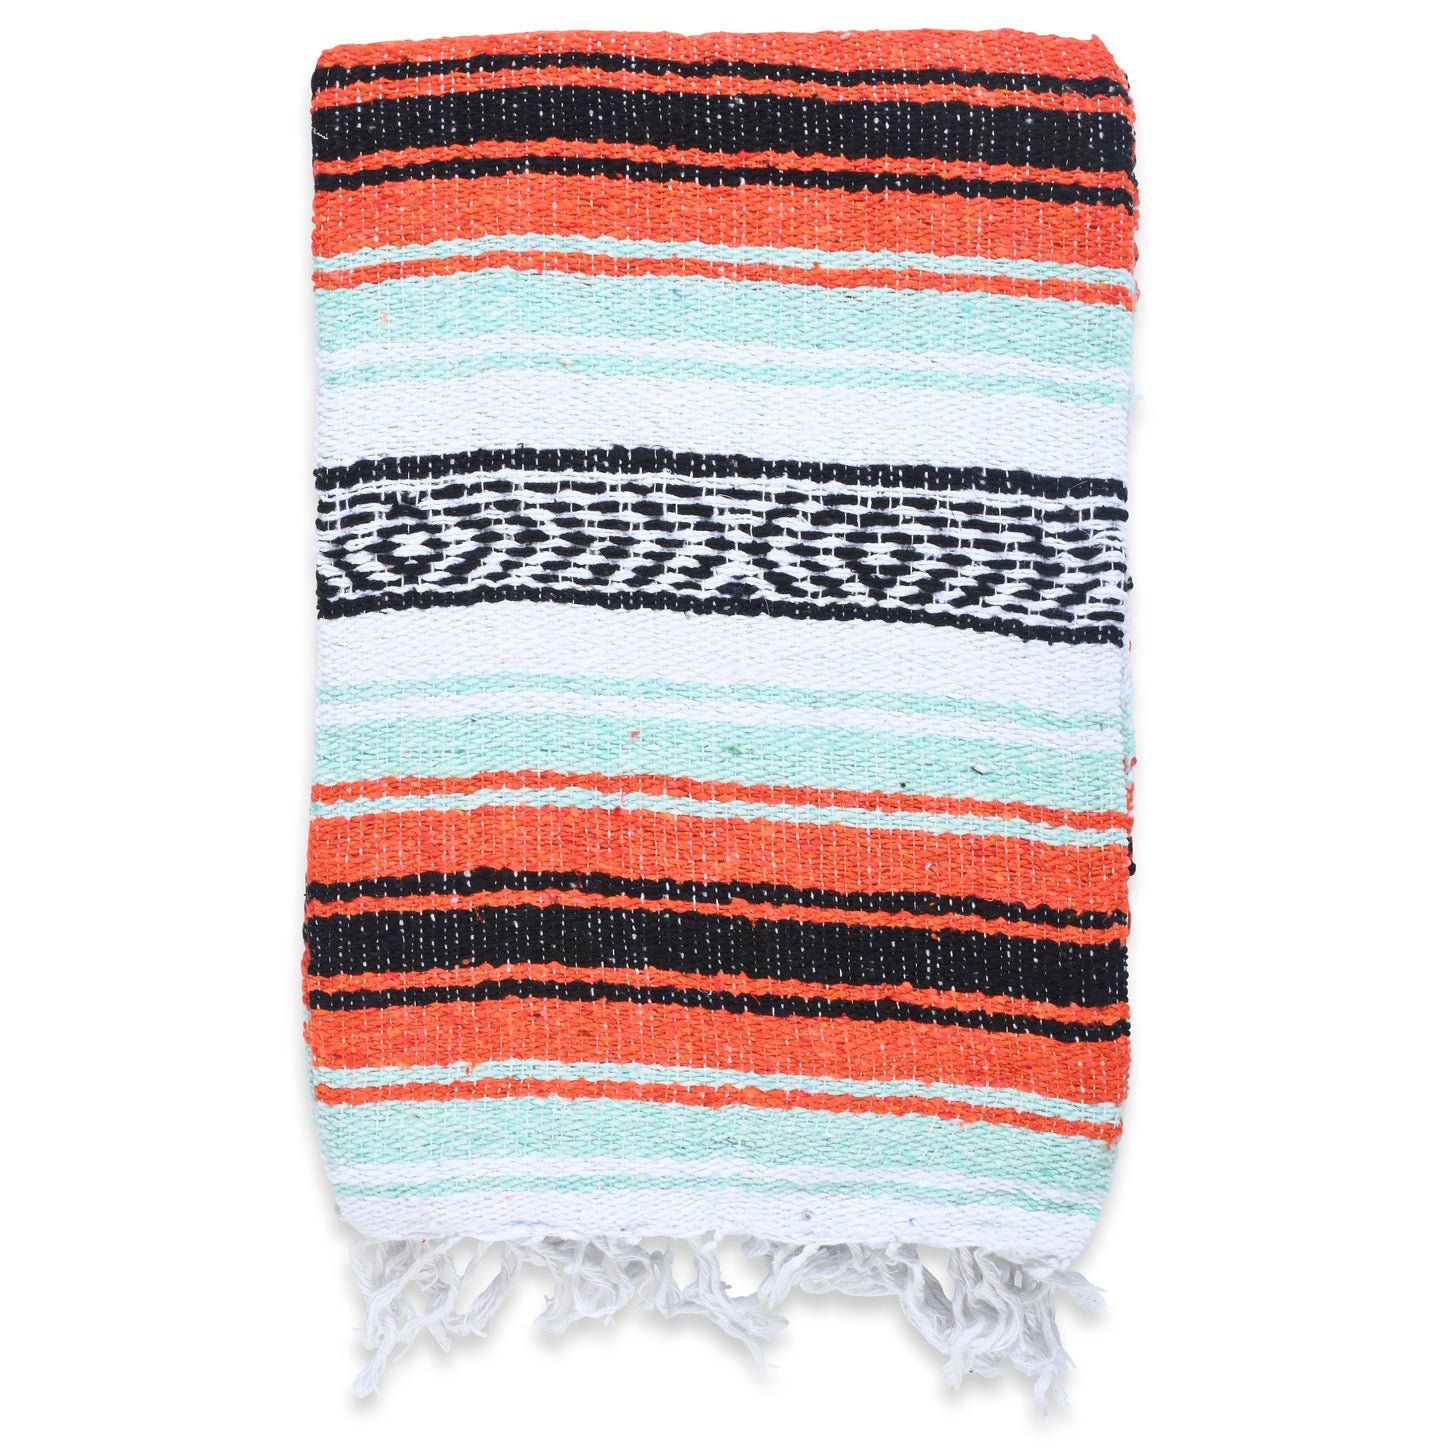 Mexican Blanket, Dreamsicle - for Yoga, Camping, Picnics, Travel, Beach